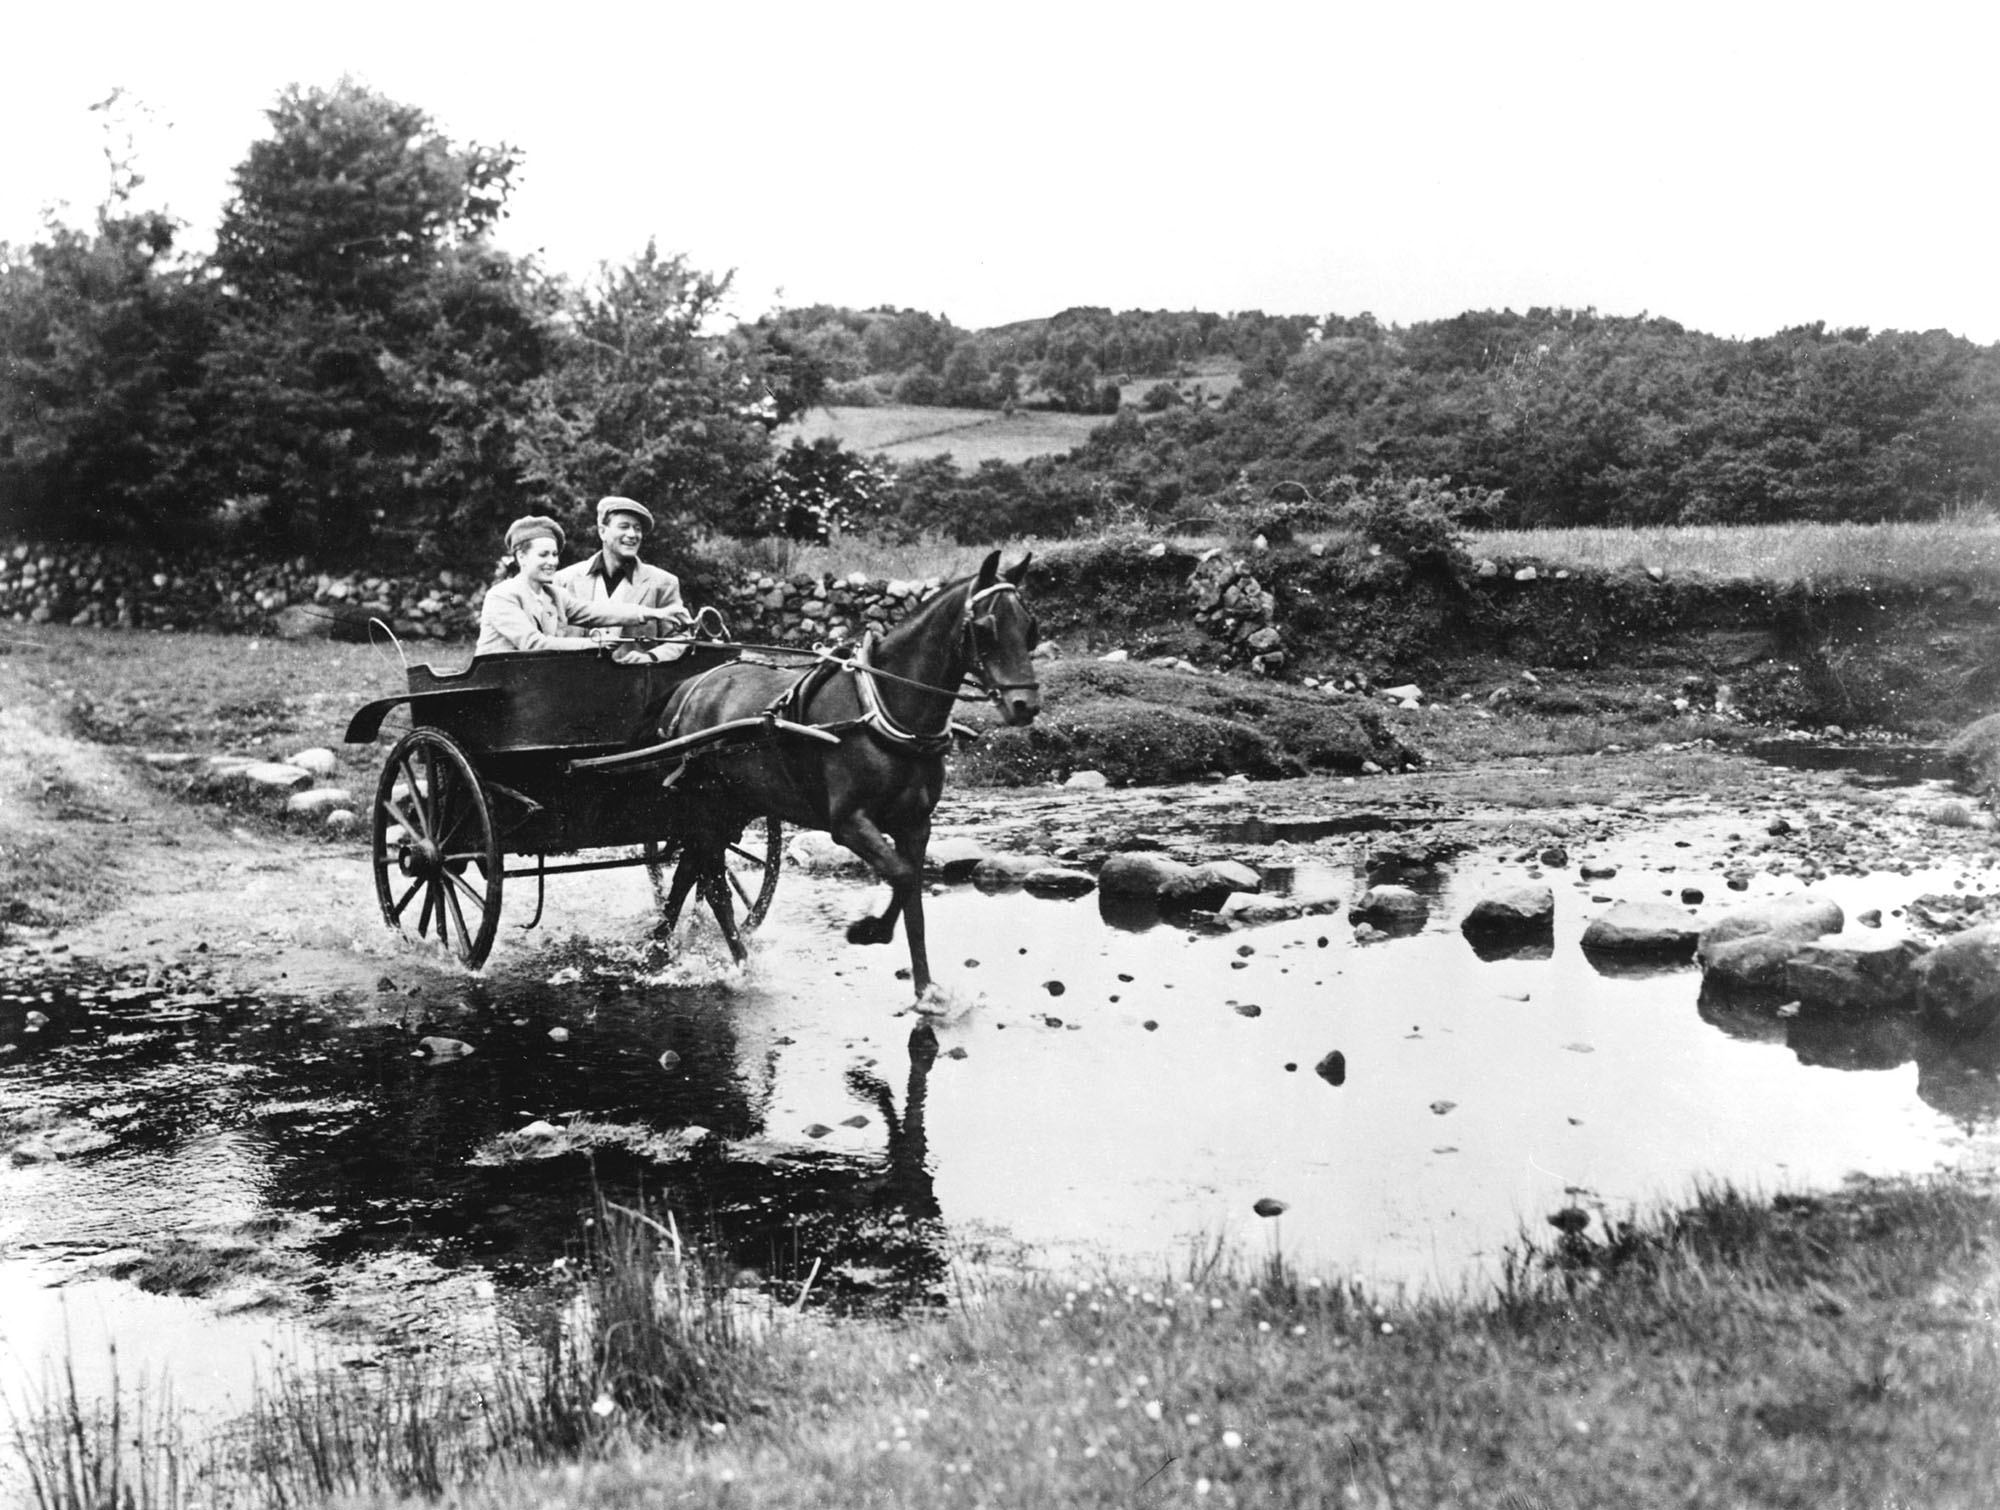 black-and-white image from the 1952 movie "The Quiet Man." It depicts stars Maureen O'Hara and John Wayne riding in a horse-drawn wagon across a pond in the Irish countryside.